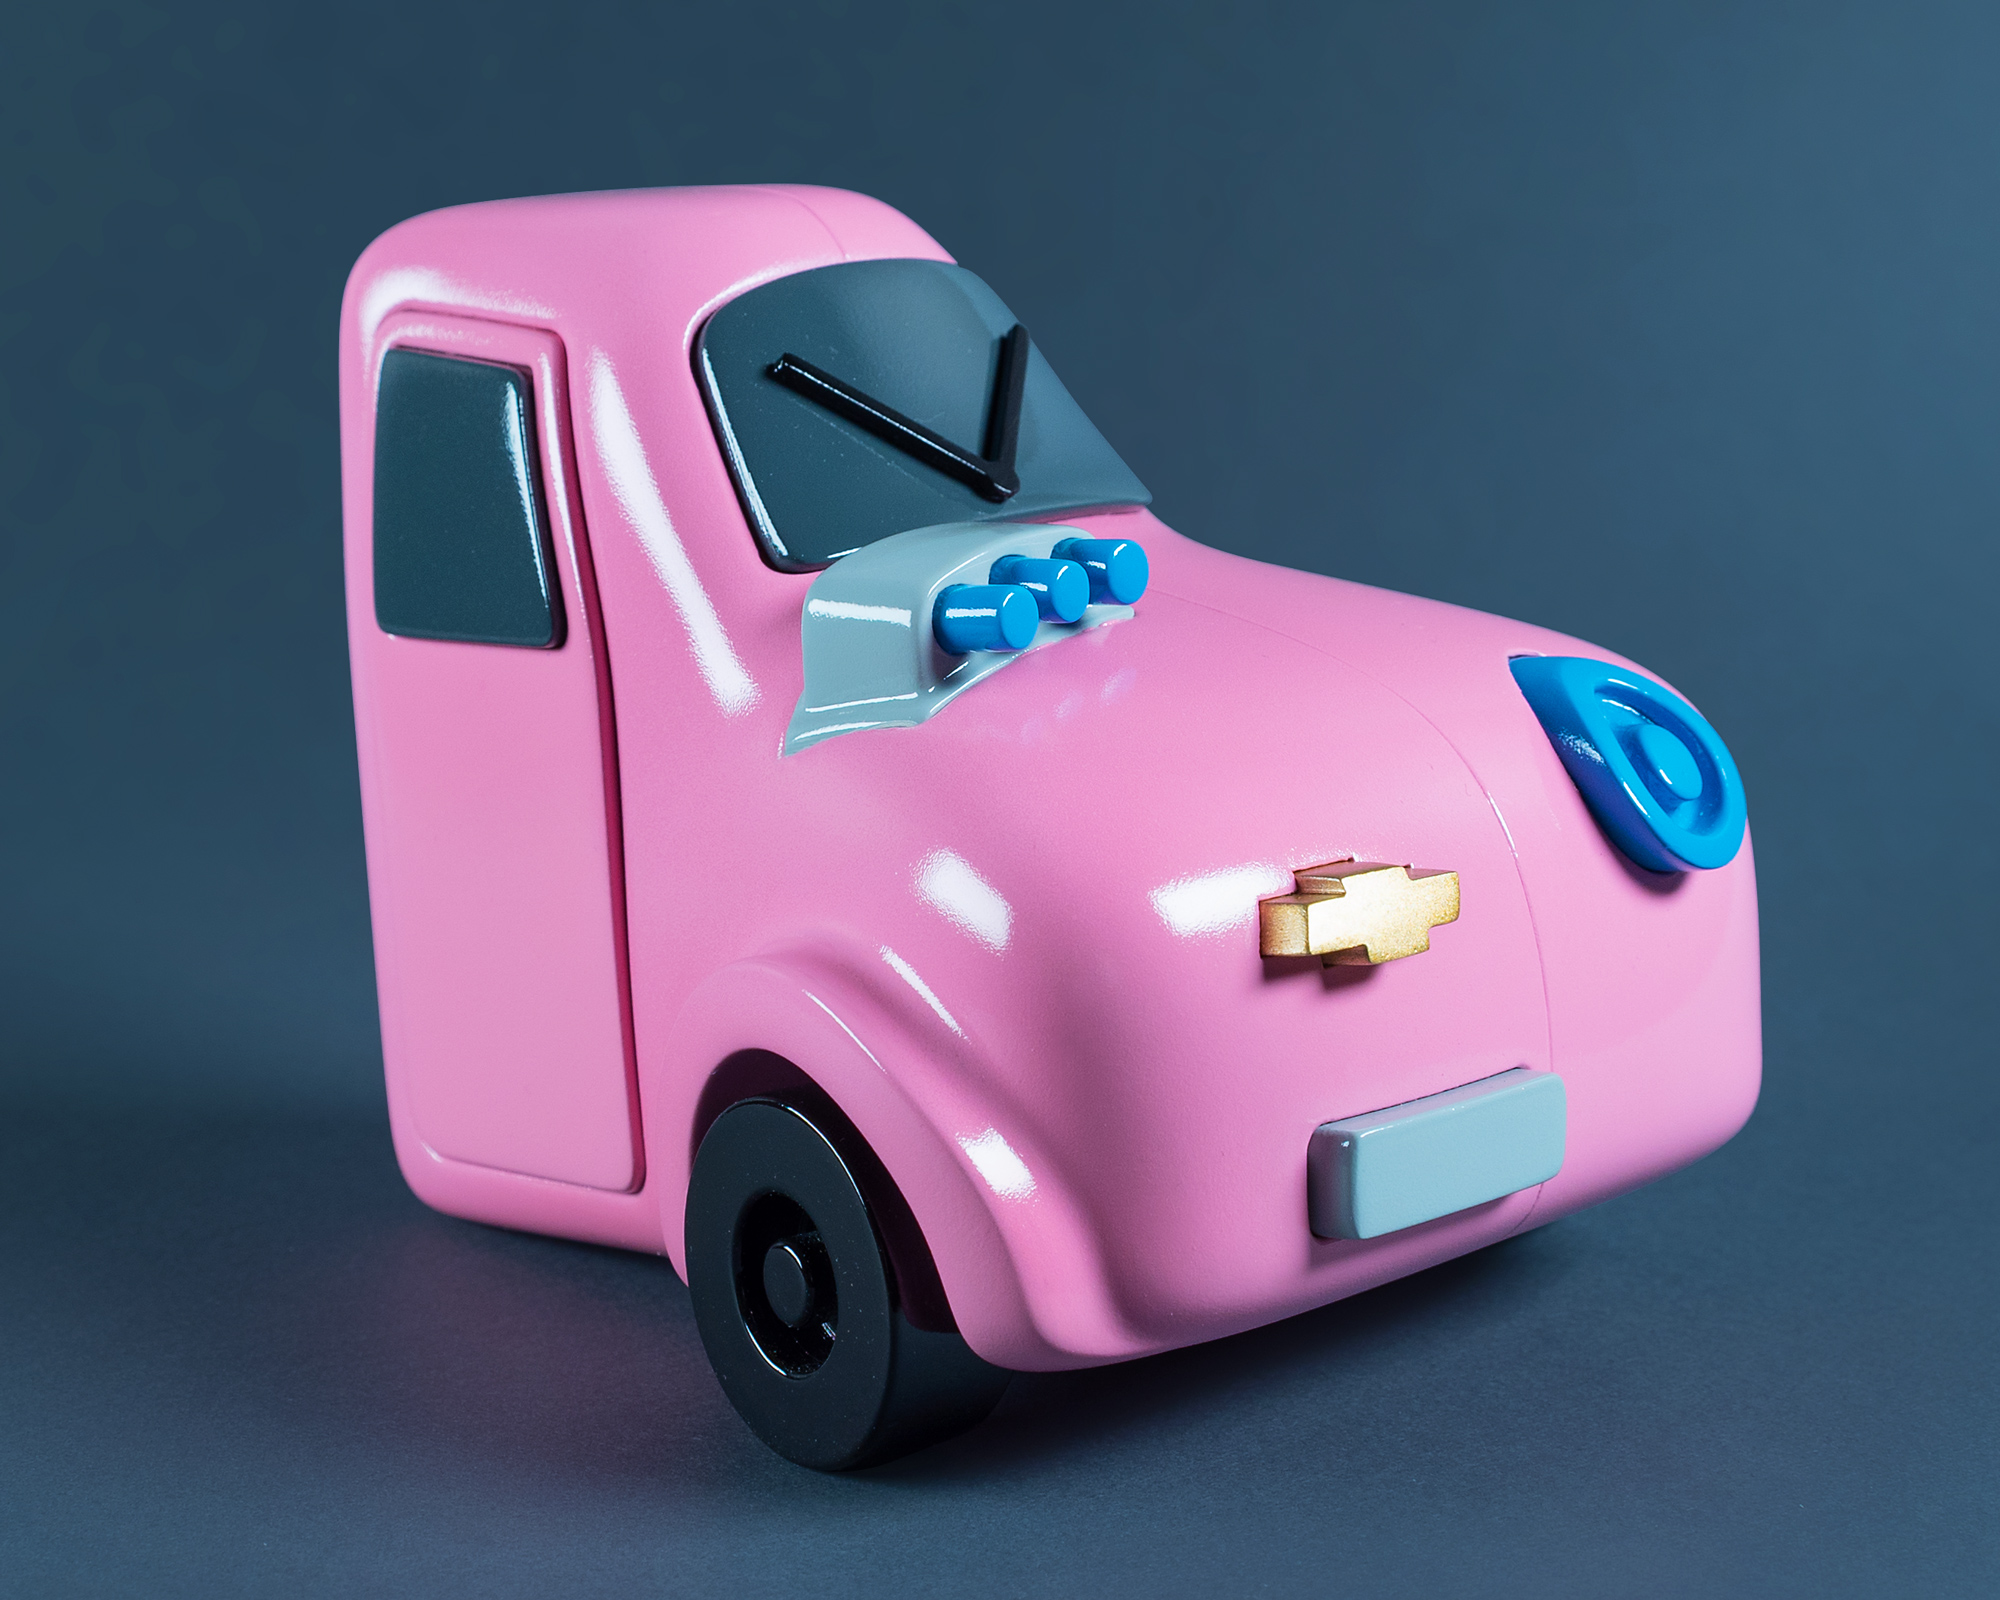 prototype of a toy car